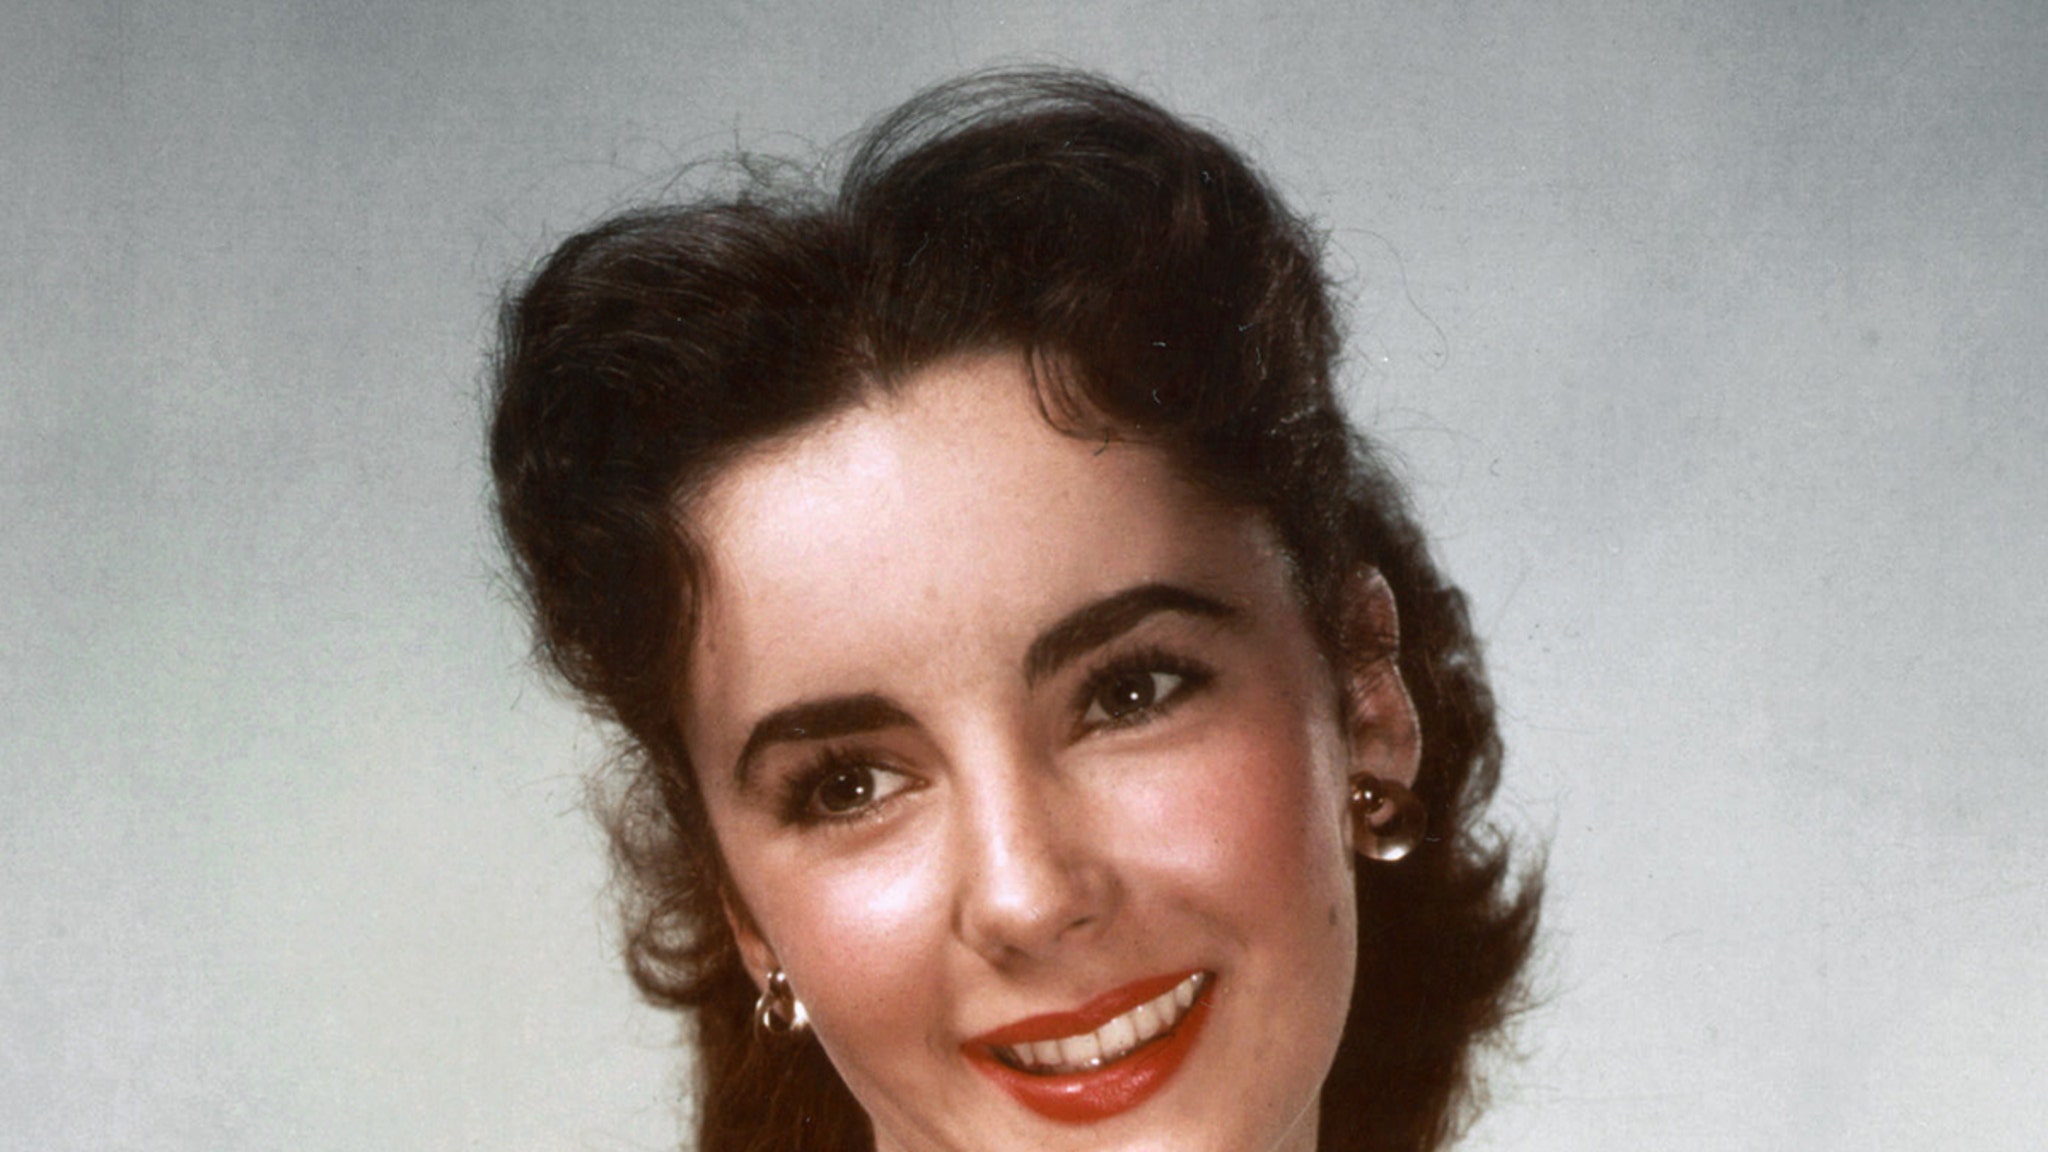 Elizabeth Taylor's Menorahs to be Auctioned Off After Hanukkah Display